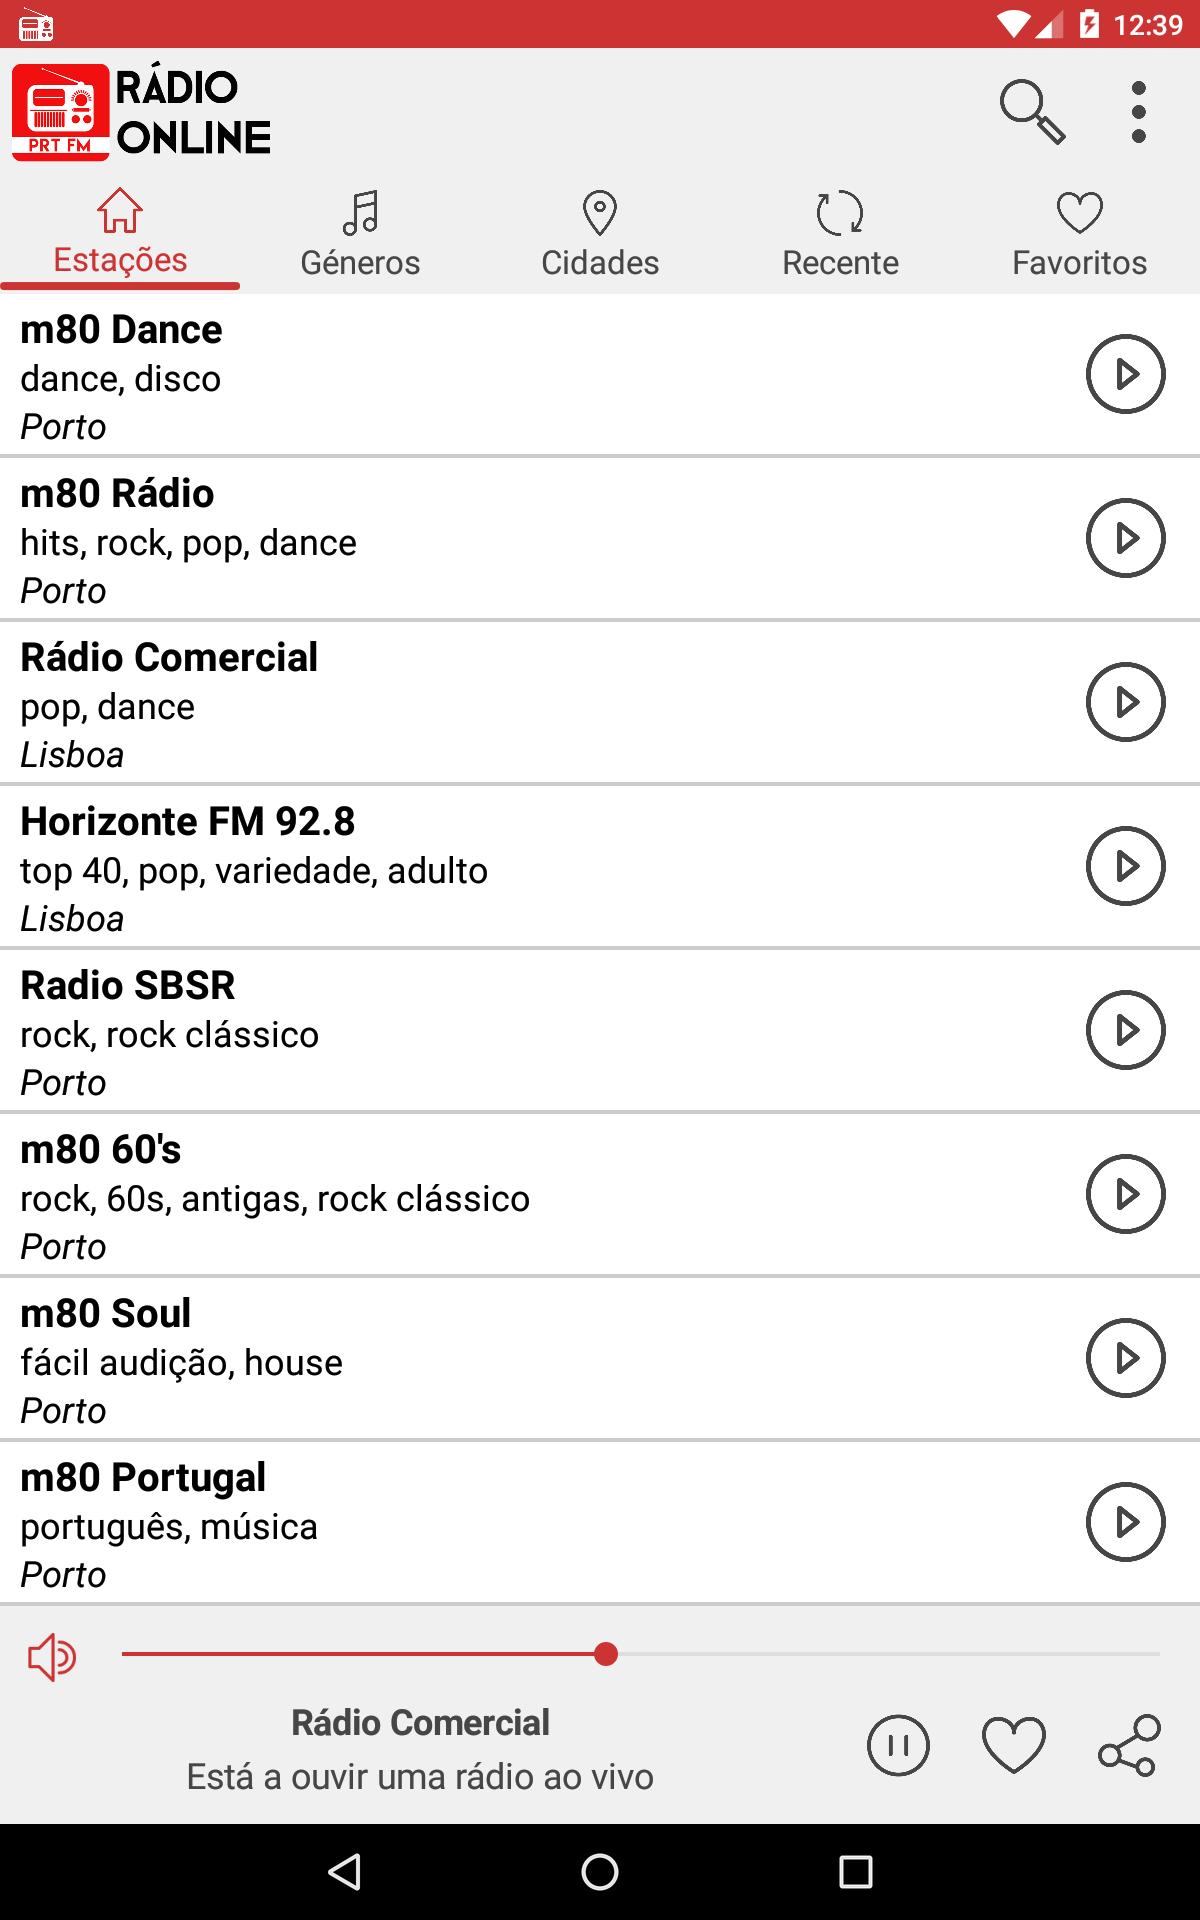 Radio Online Portugal for Android - APK Download